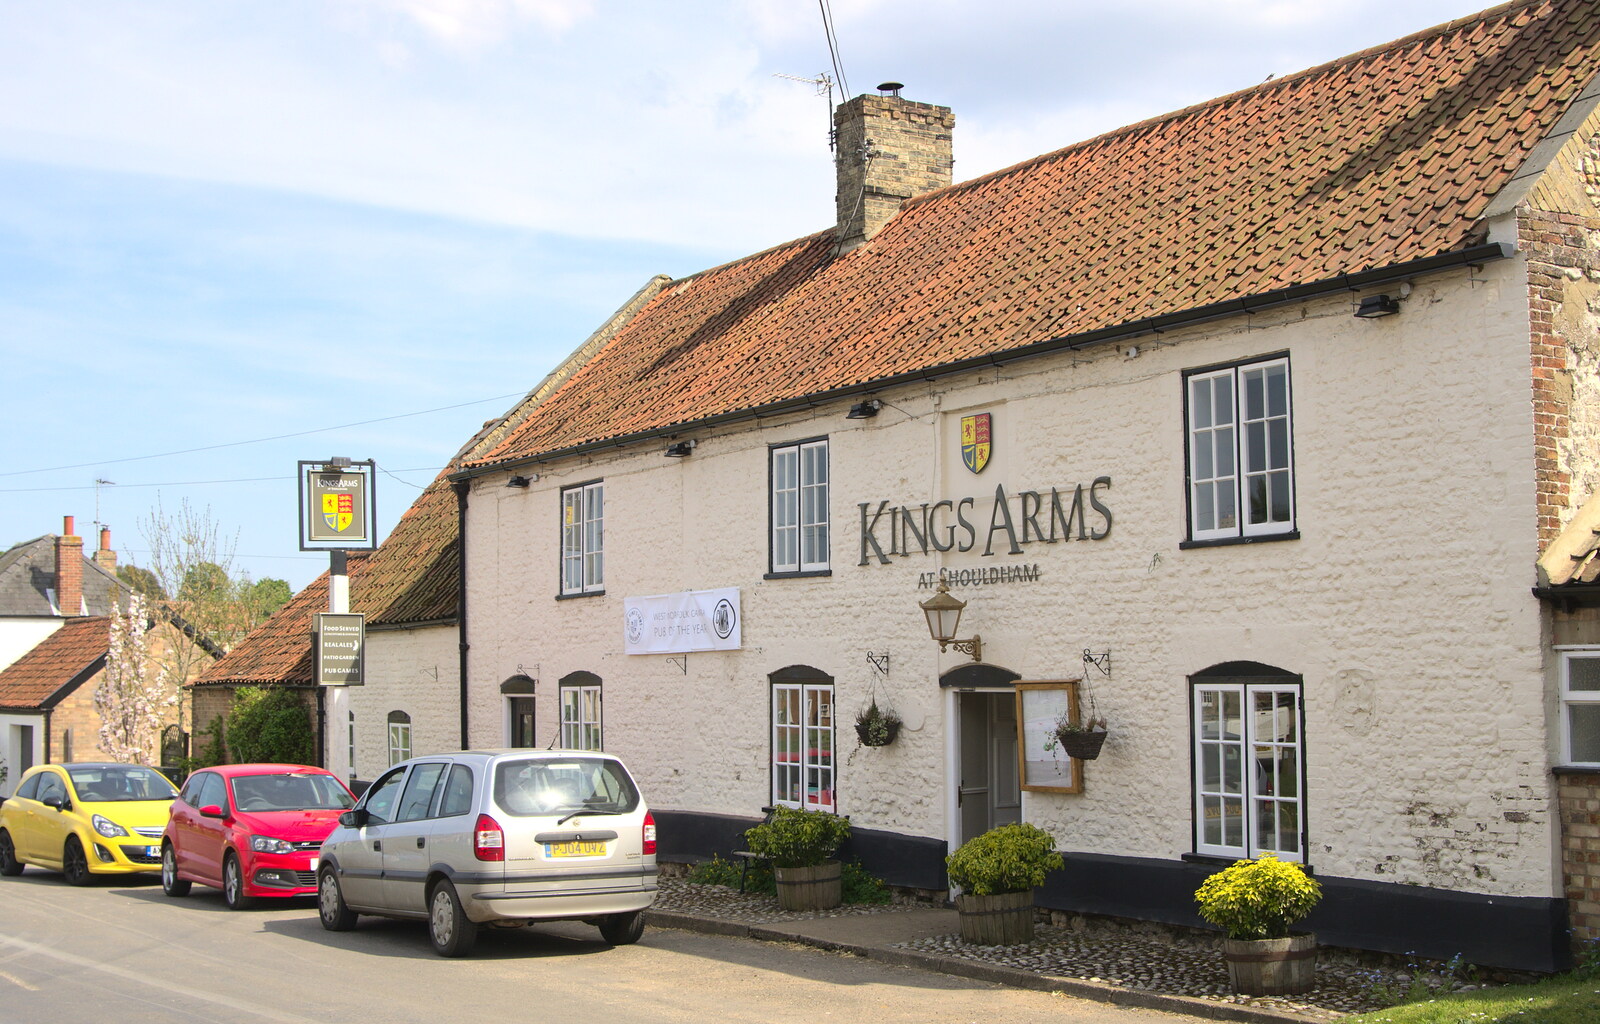 The Kings Arms from The BSCC Cycling Weekender, Outwell, West Norfolk - 7th May 2016